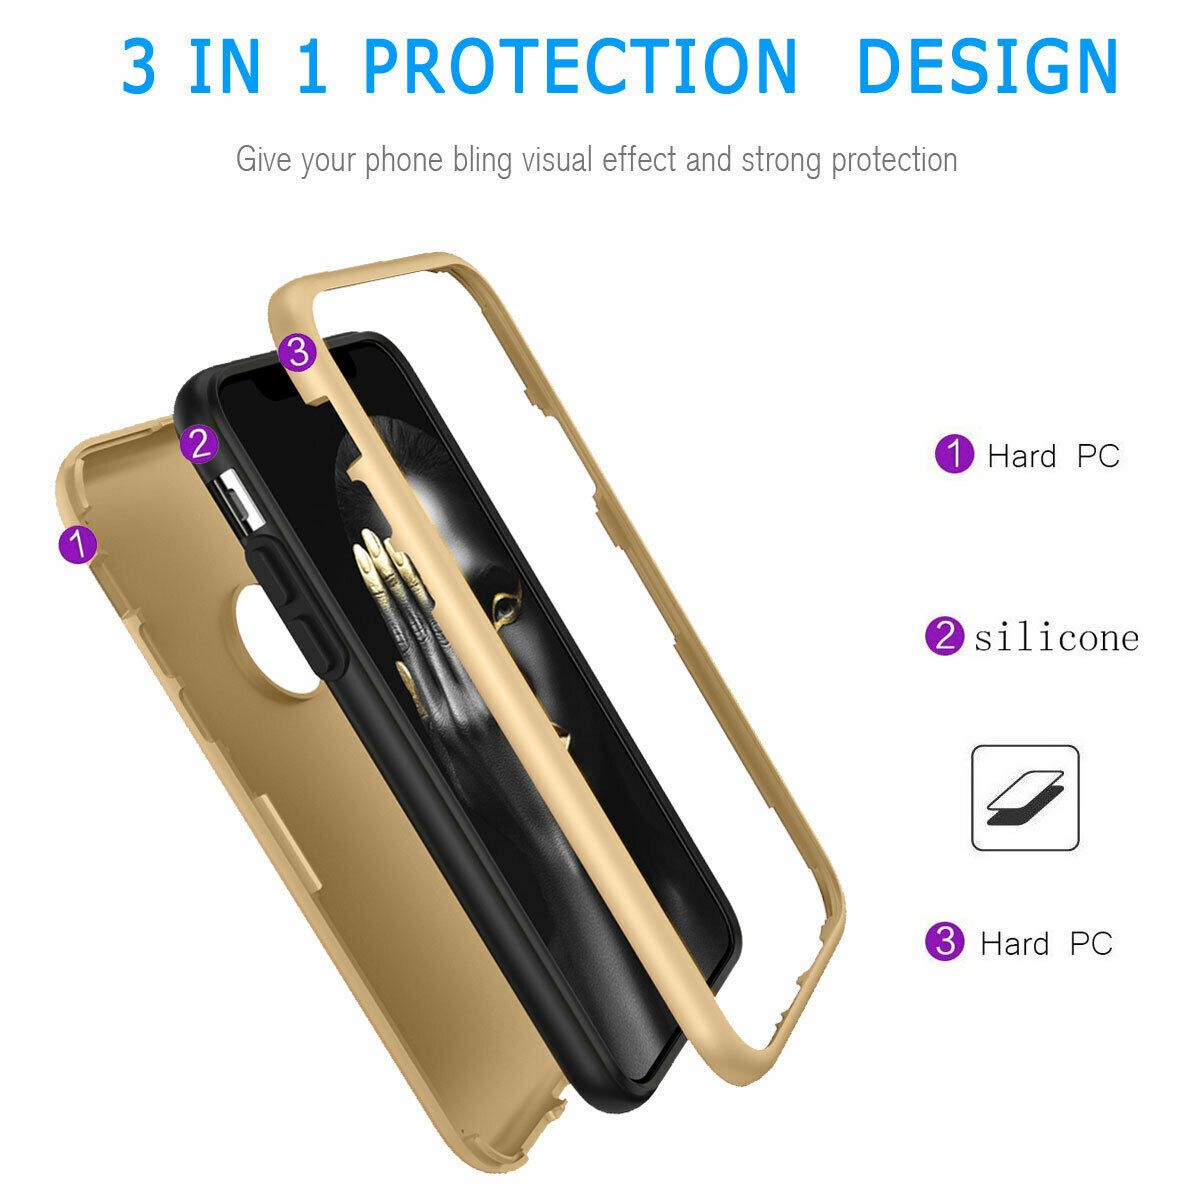 Case For iPhone X Xr XS Max 6 7 8 Plus Shockproof 360 Full Body Cover Protective detsarah 